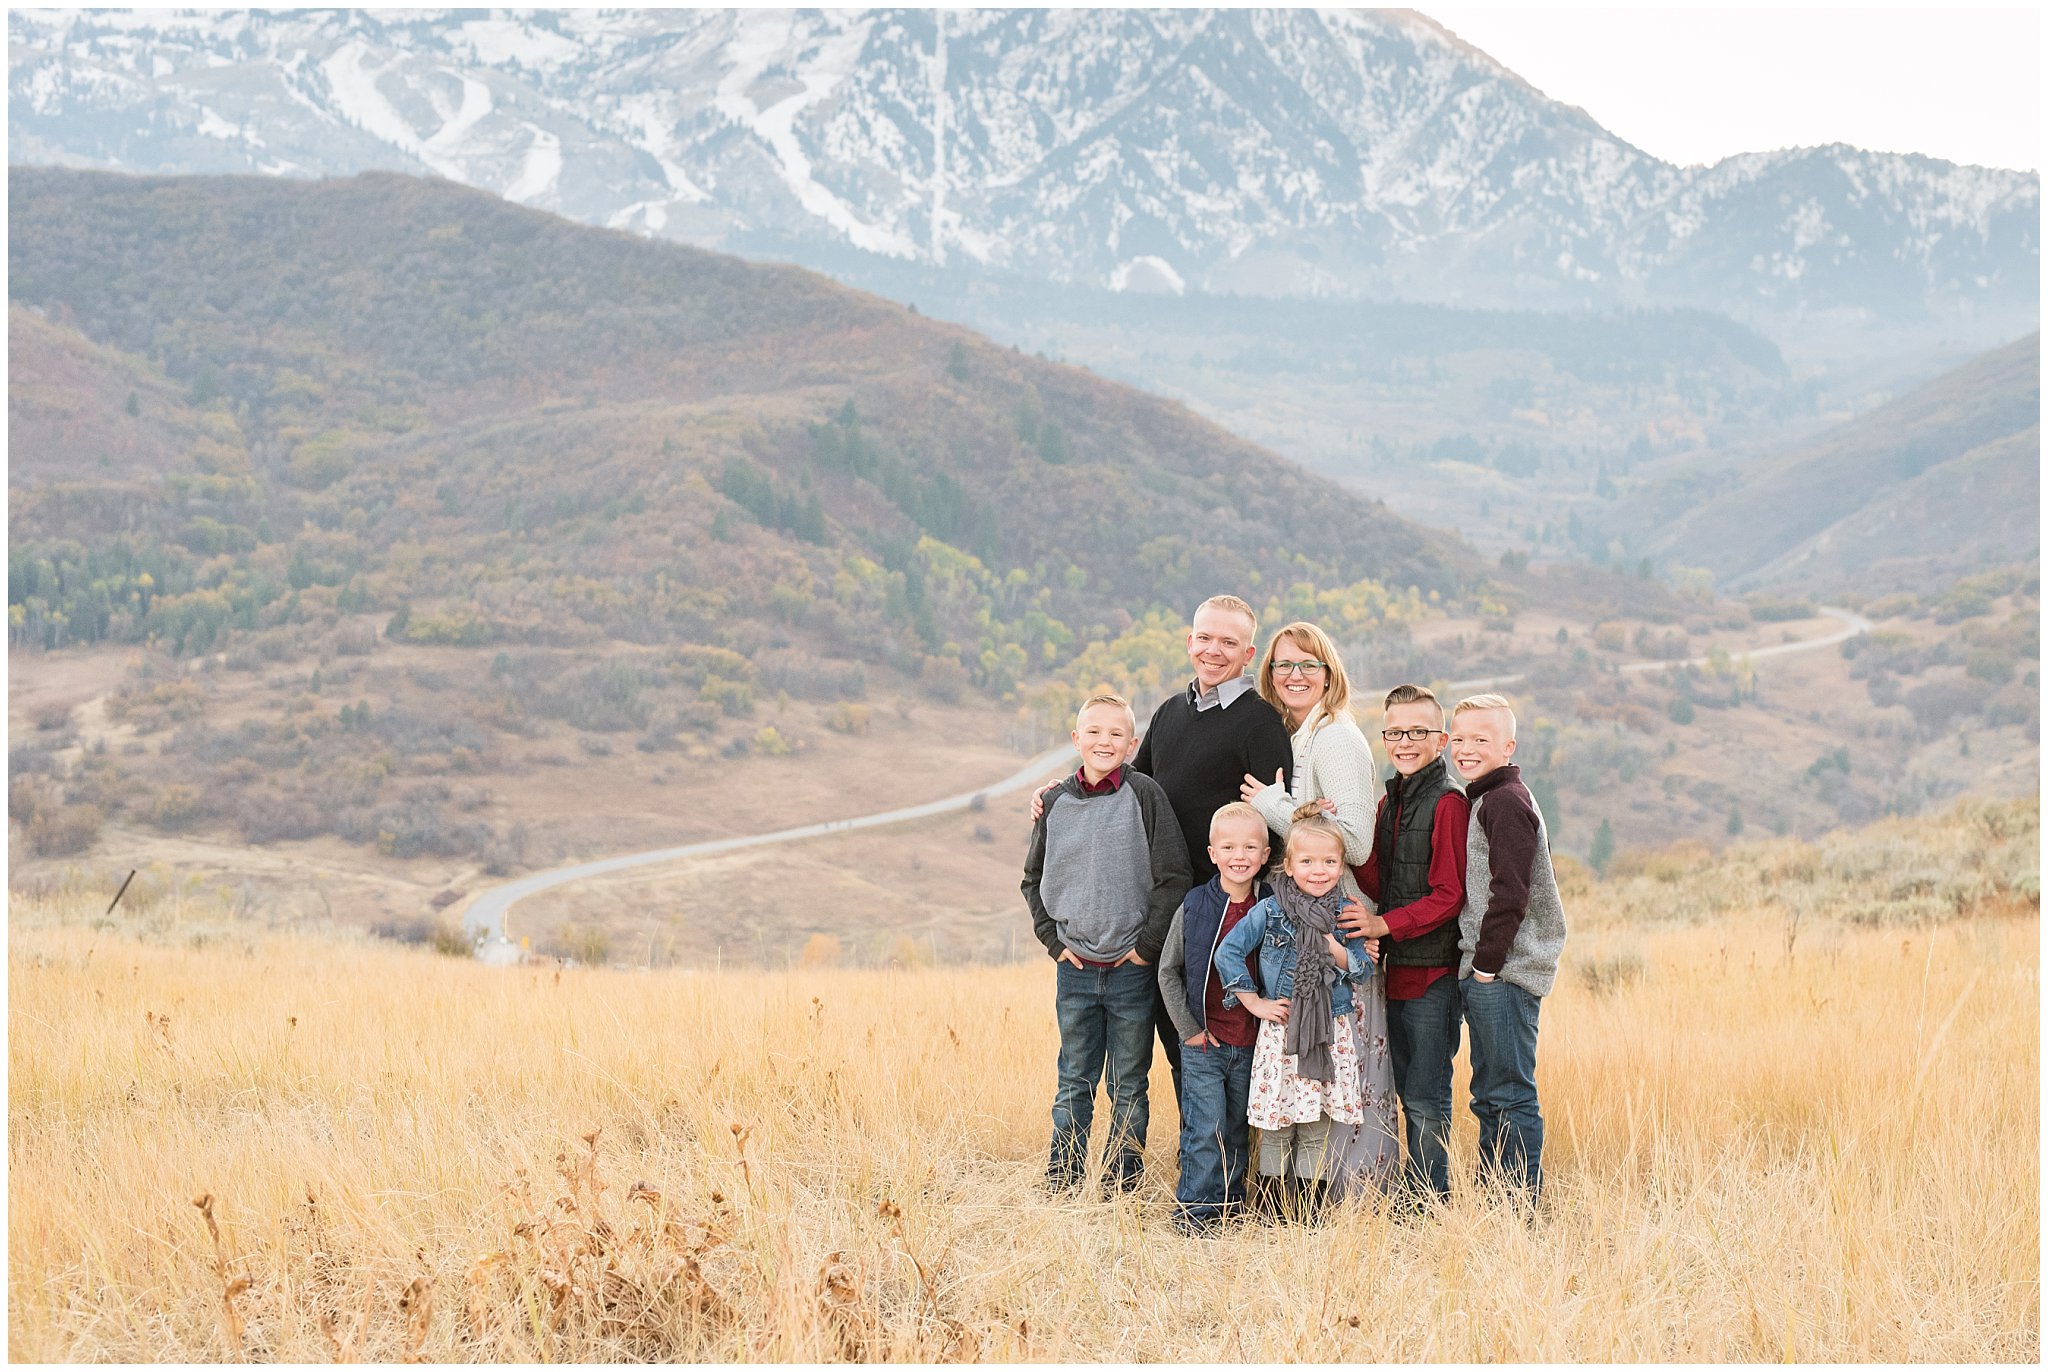 Family Picture in front of snowy mountains | Fall Family Pictures in the Mountains | Snowbasin, Utah | Jessie and Dallin Photography